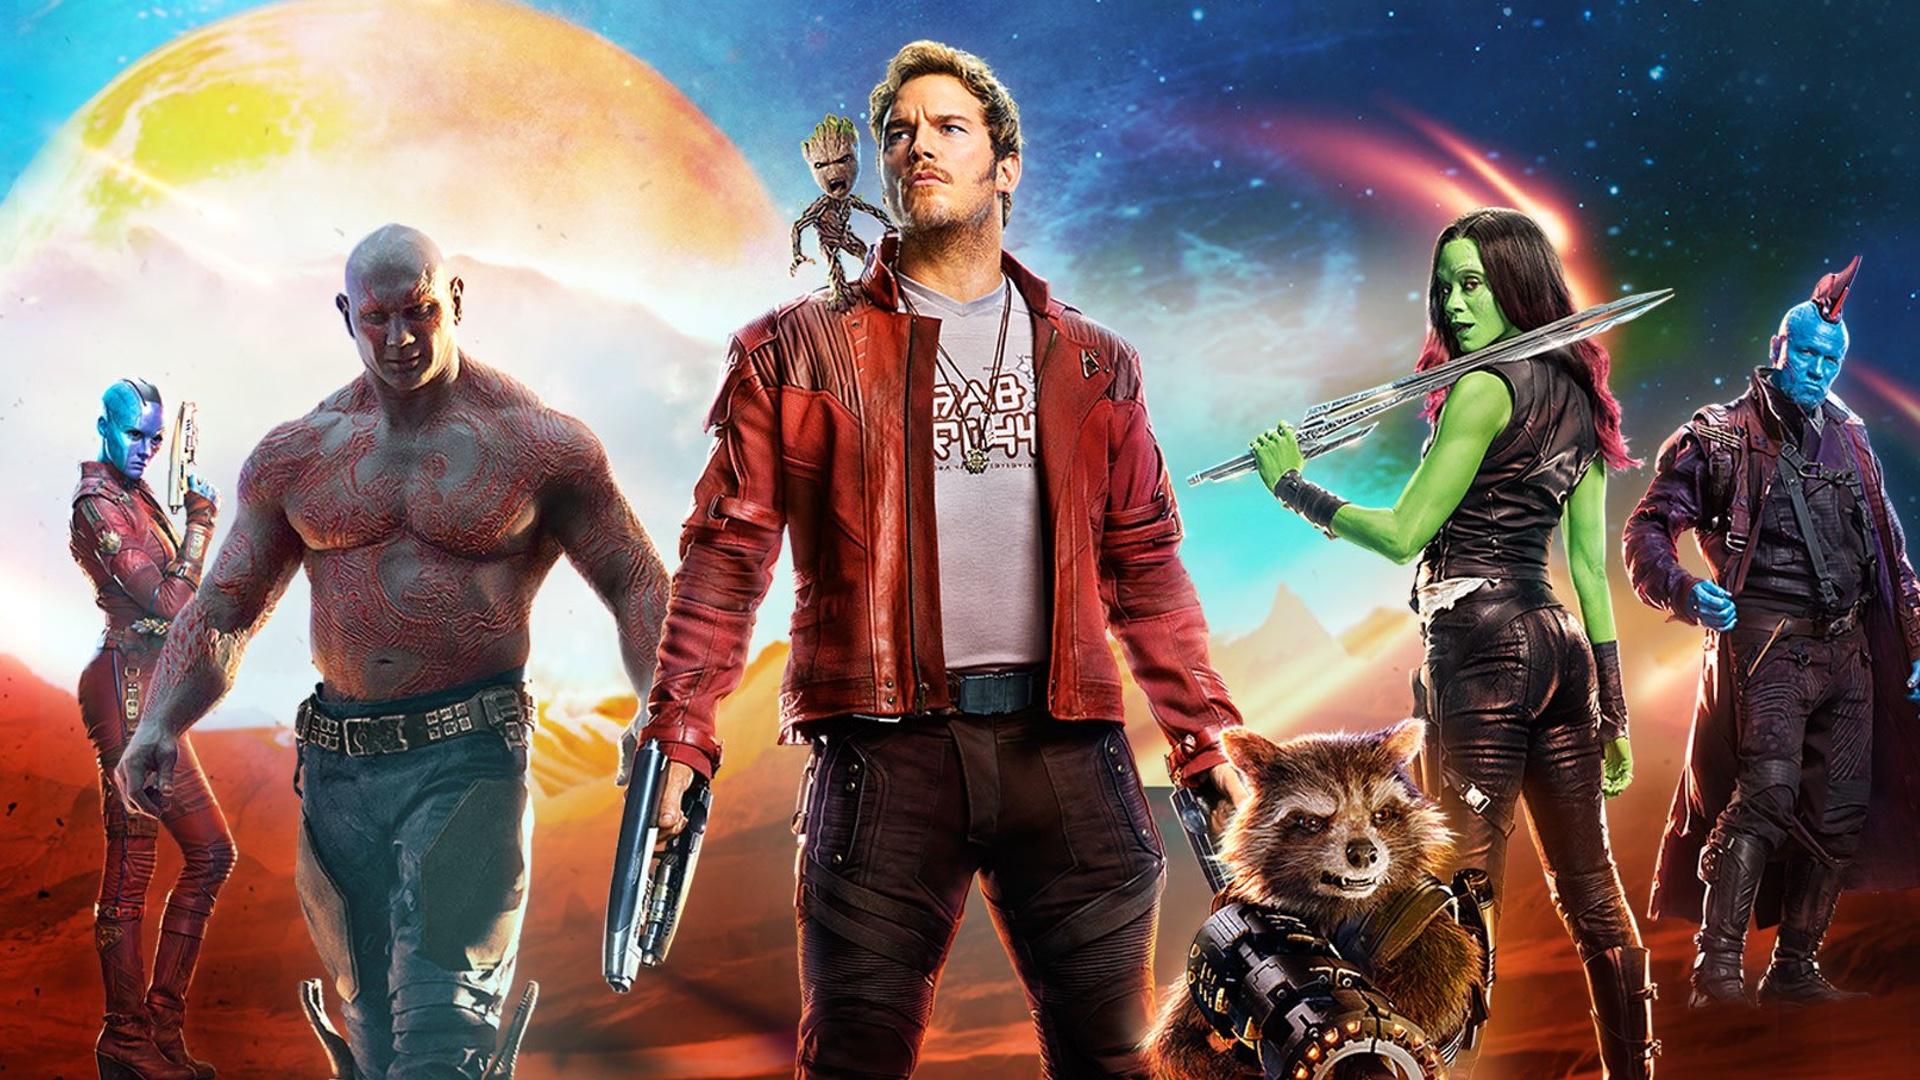 Production Of Guardians Of The Galaxy Vol.3 Pushed Back To 2021